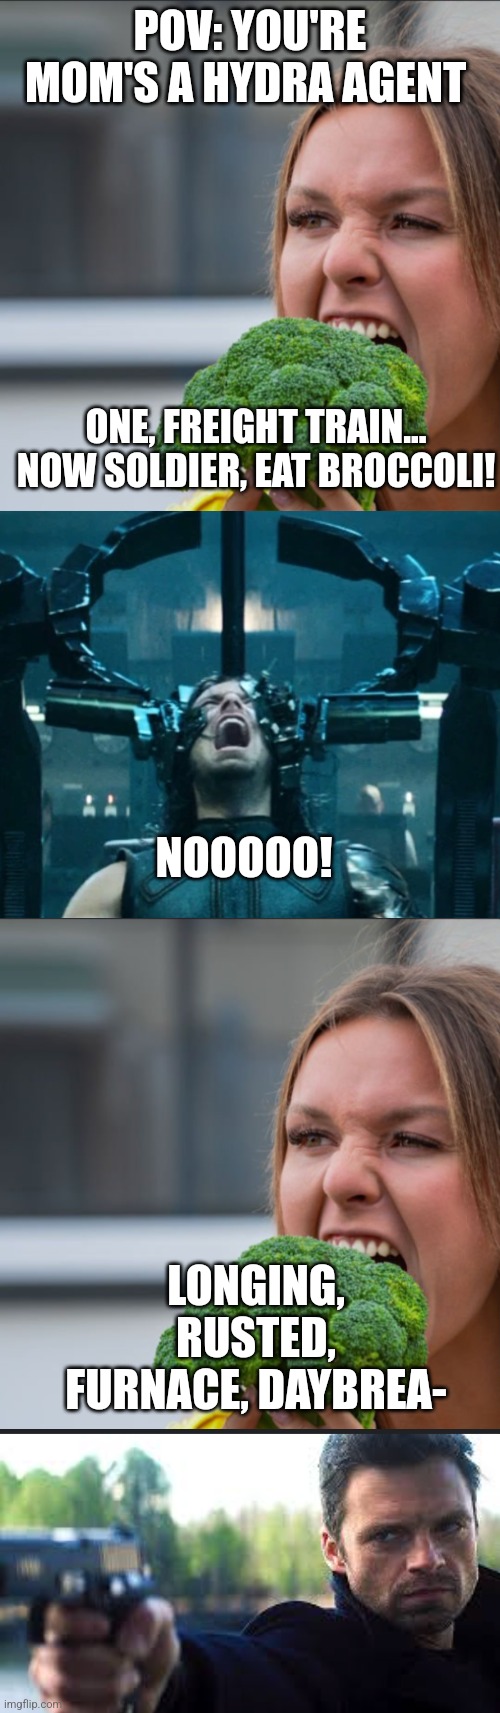 Bucky vs Mom | POV: YOU'RE MOM'S A HYDRA AGENT; ONE, FREIGHT TRAIN...
NOW SOLDIER, EAT BROCCOLI! NOOOOO! LONGING, RUSTED, FURNACE, DAYBREA- | image tagged in marvel,winter soldier,broccoli | made w/ Imgflip meme maker